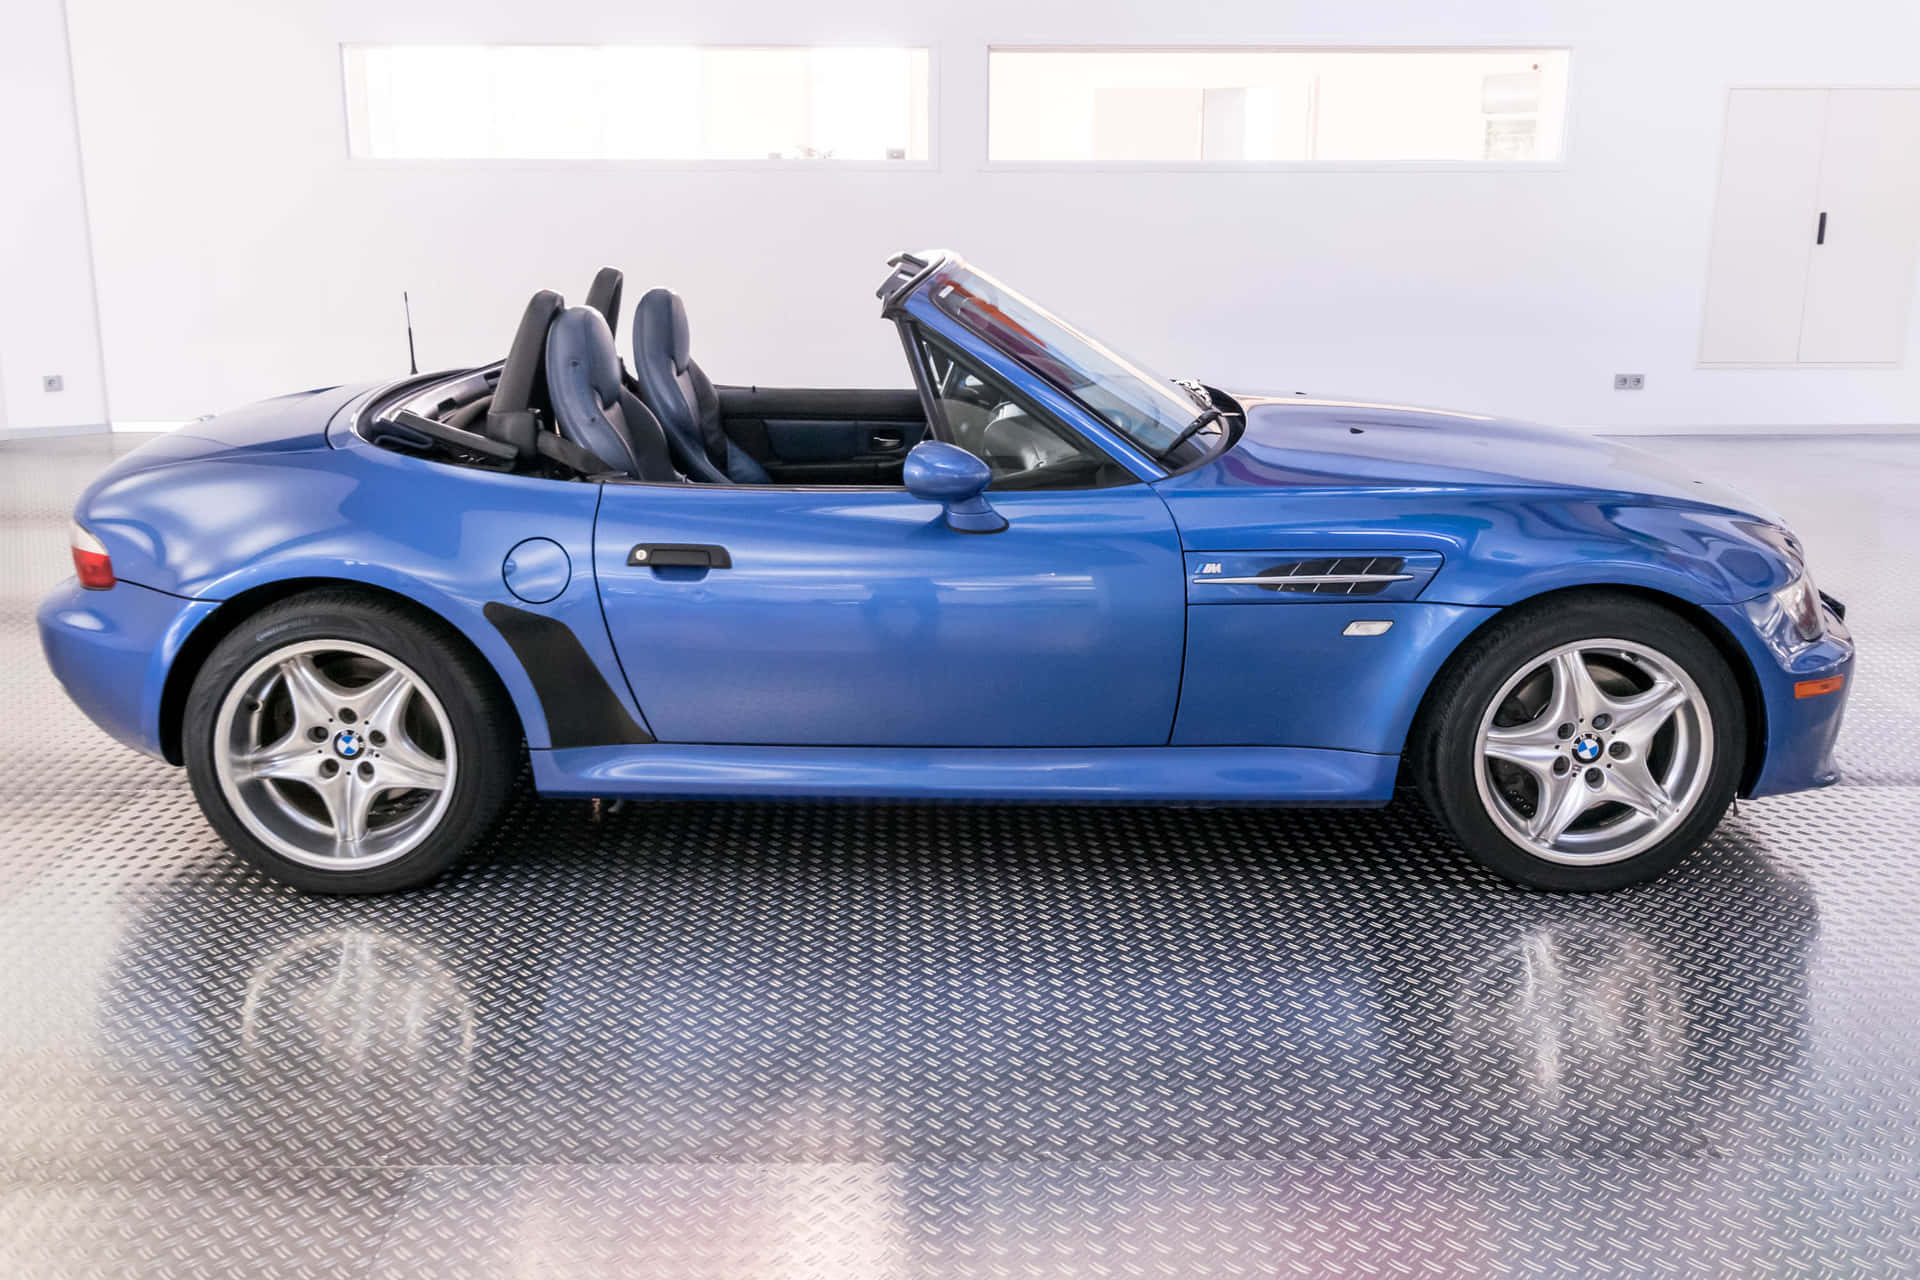 Stunning BMW Z3 Roadster in Action Wallpaper